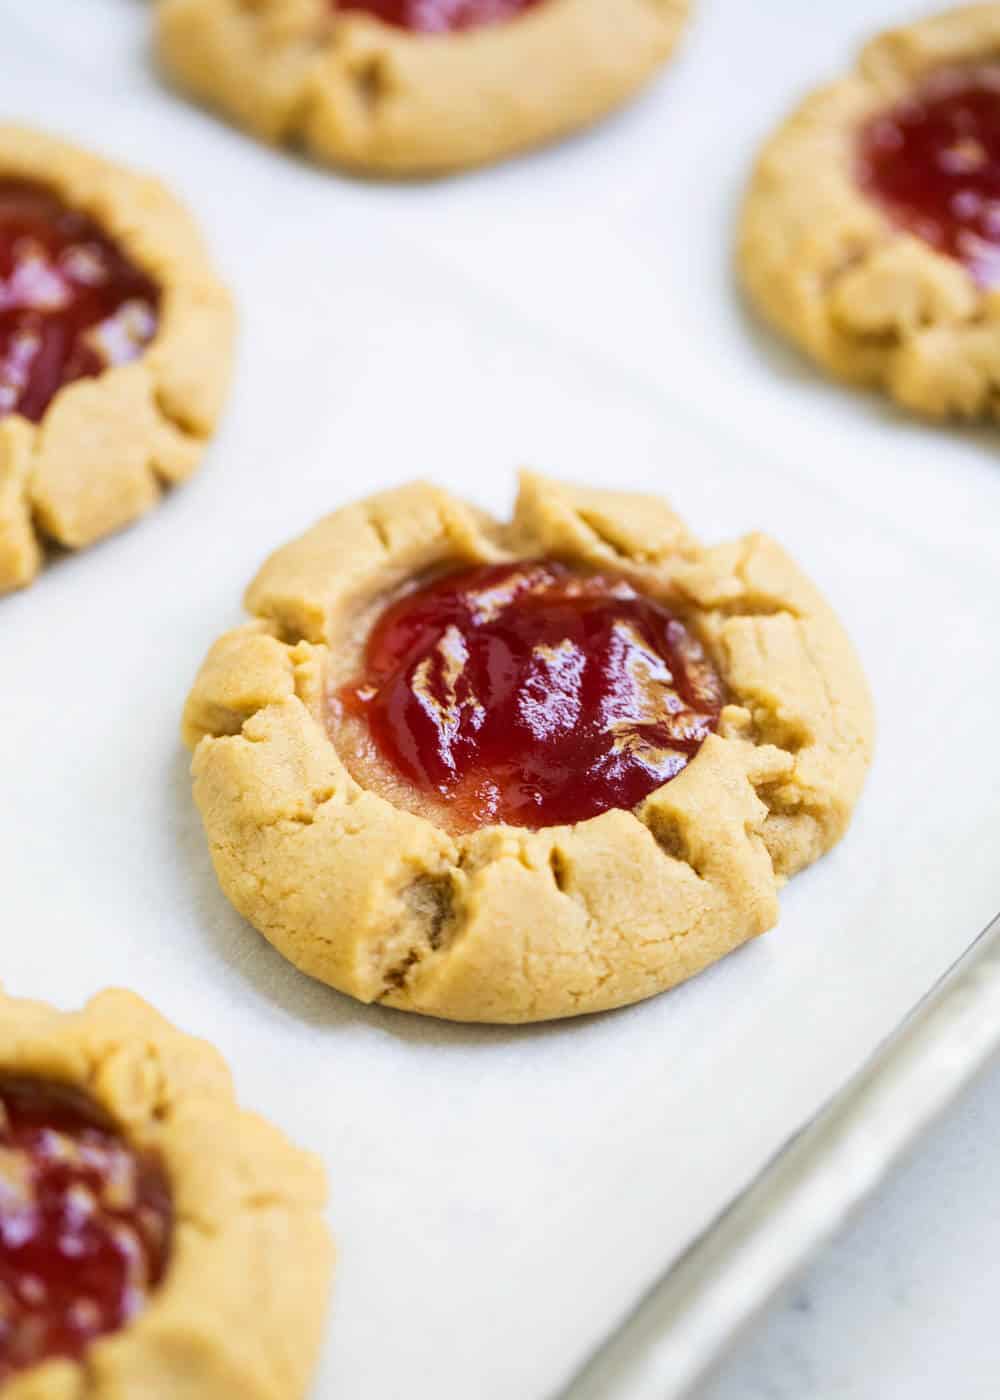 Peanut butter and jelly cookies on baking sheet.